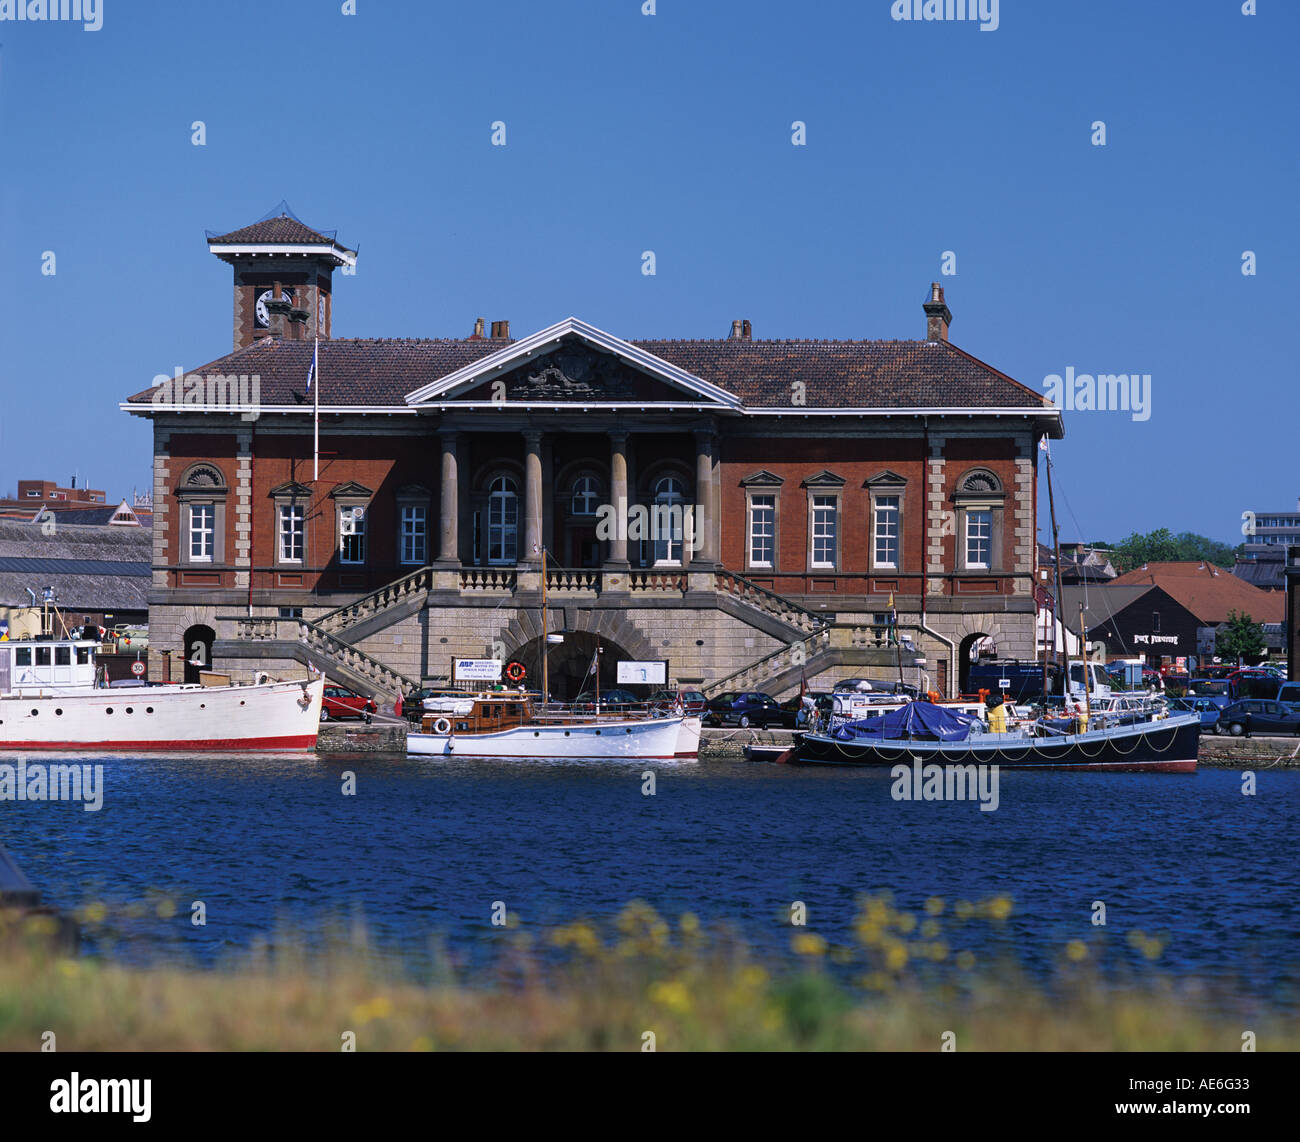 Present head office of Iswich Port authorities ABP on the north side of The Victorian wet dock Ipswich Suffolk Stock Photo